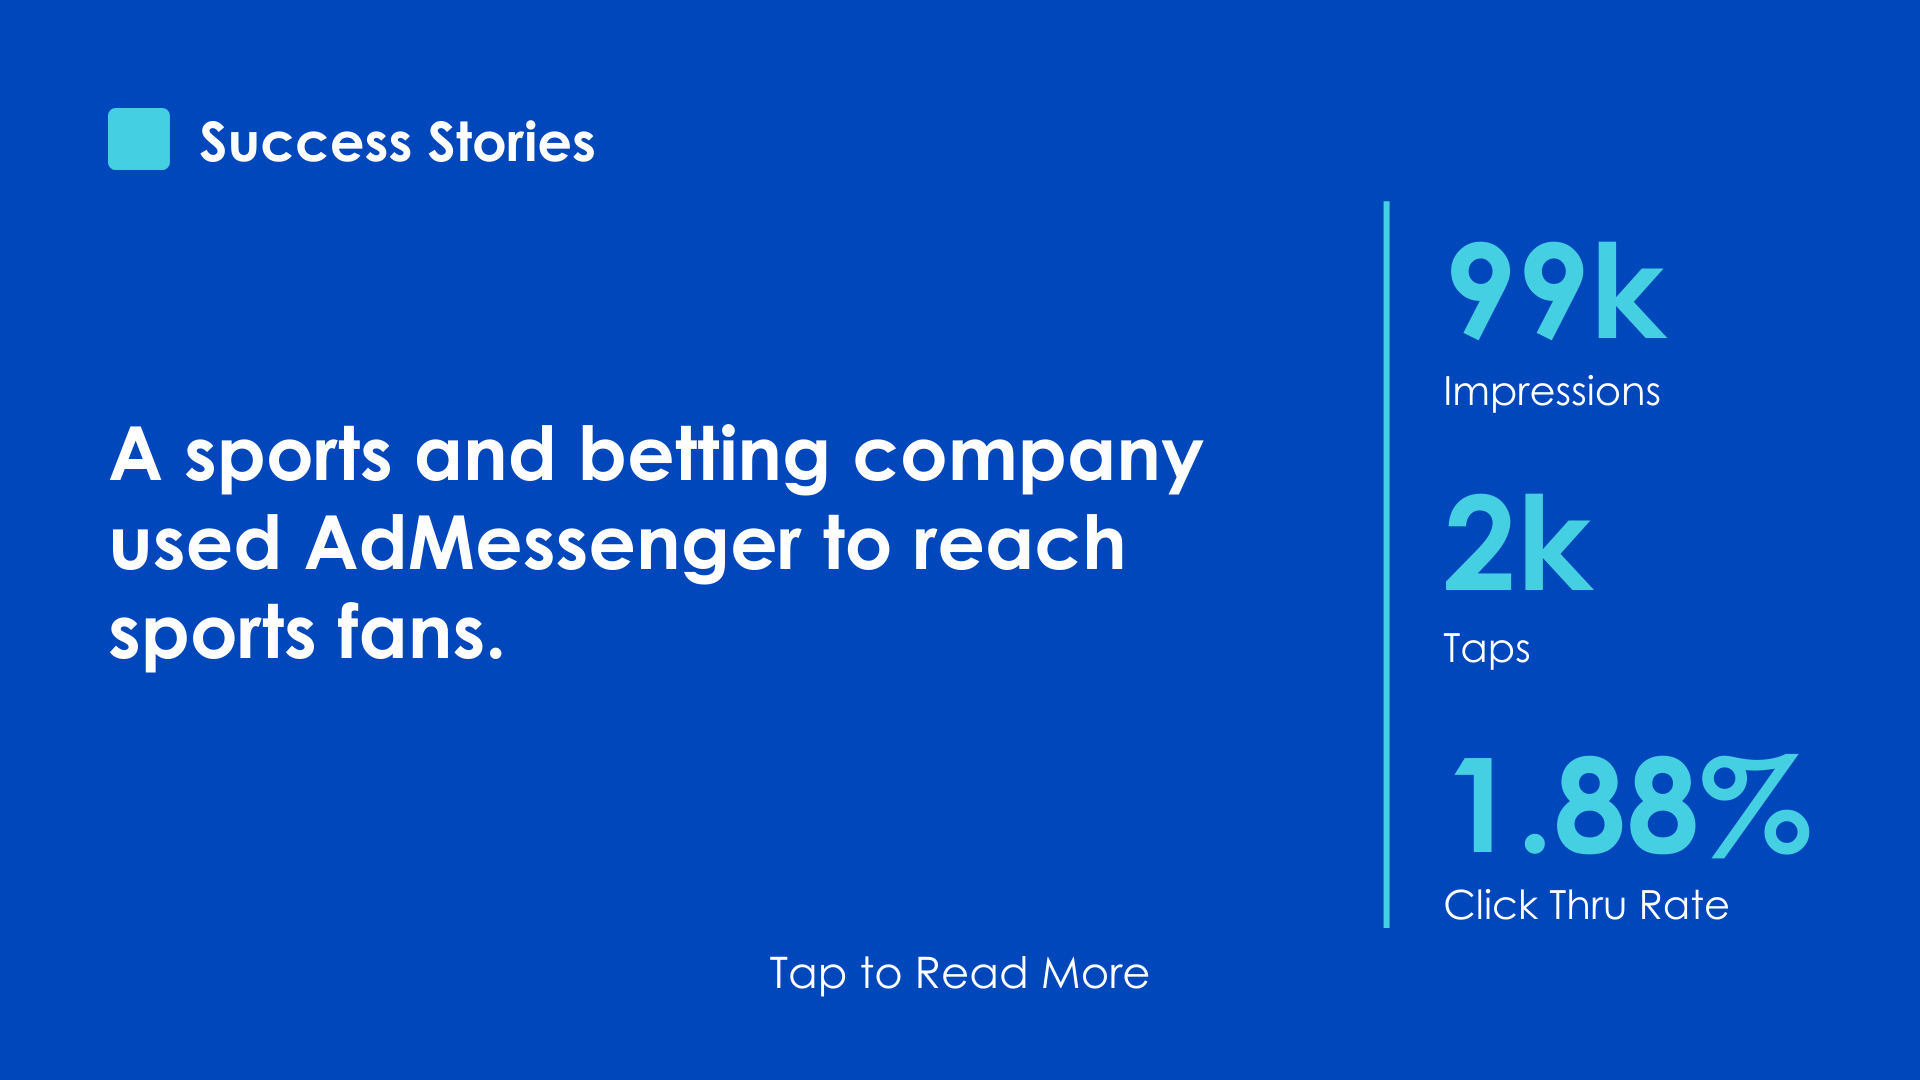  Sports and betting company mobile advertising success story 